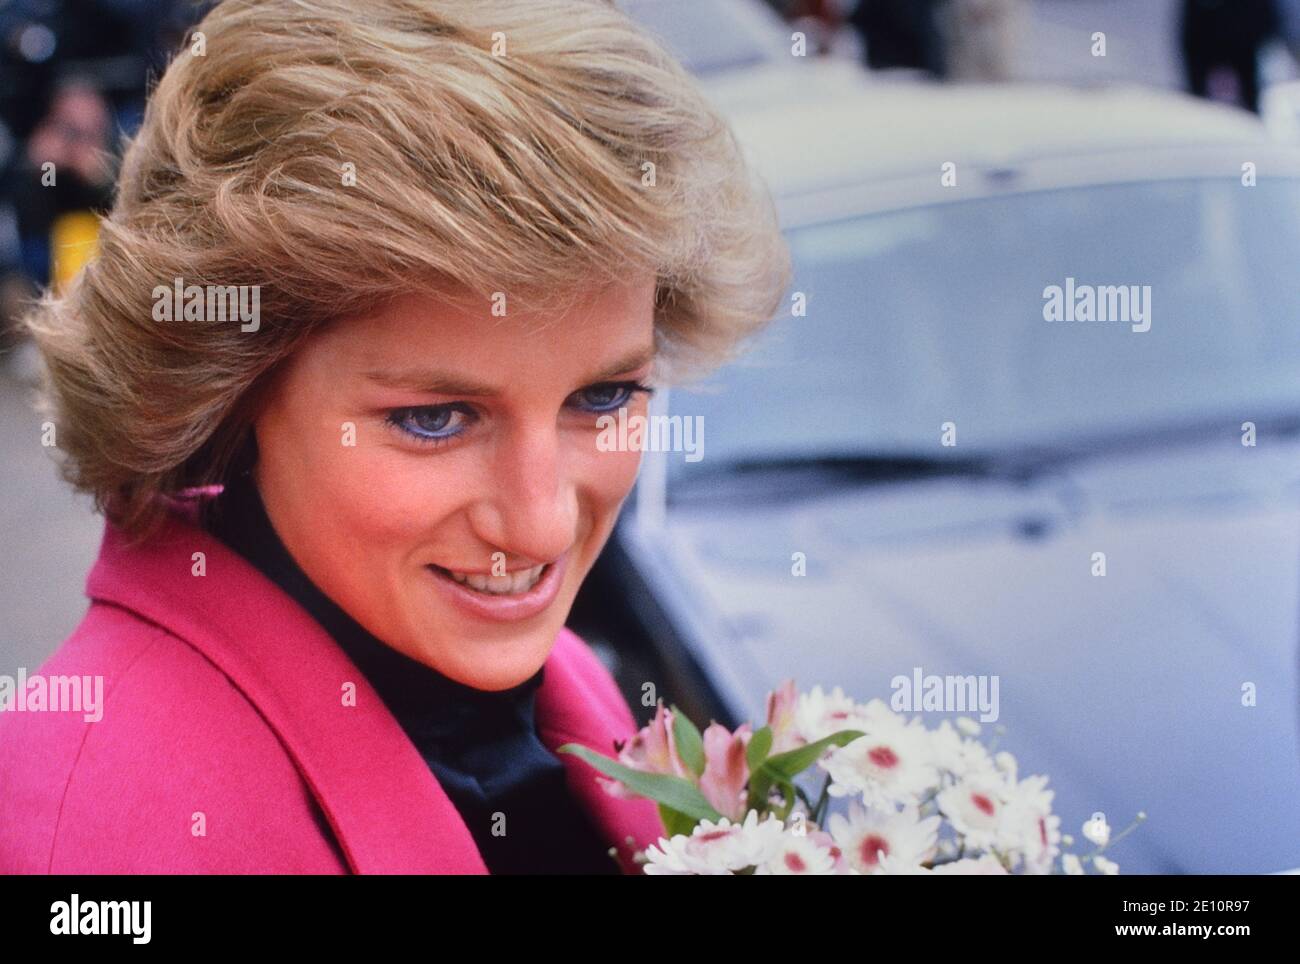 A smiling Diana, Princess of Wales receiving a bouquet of flowers during a visit to the Relate Marriage Guidance Centre in Barnet, north London, 29th November 1988 Stock Photo